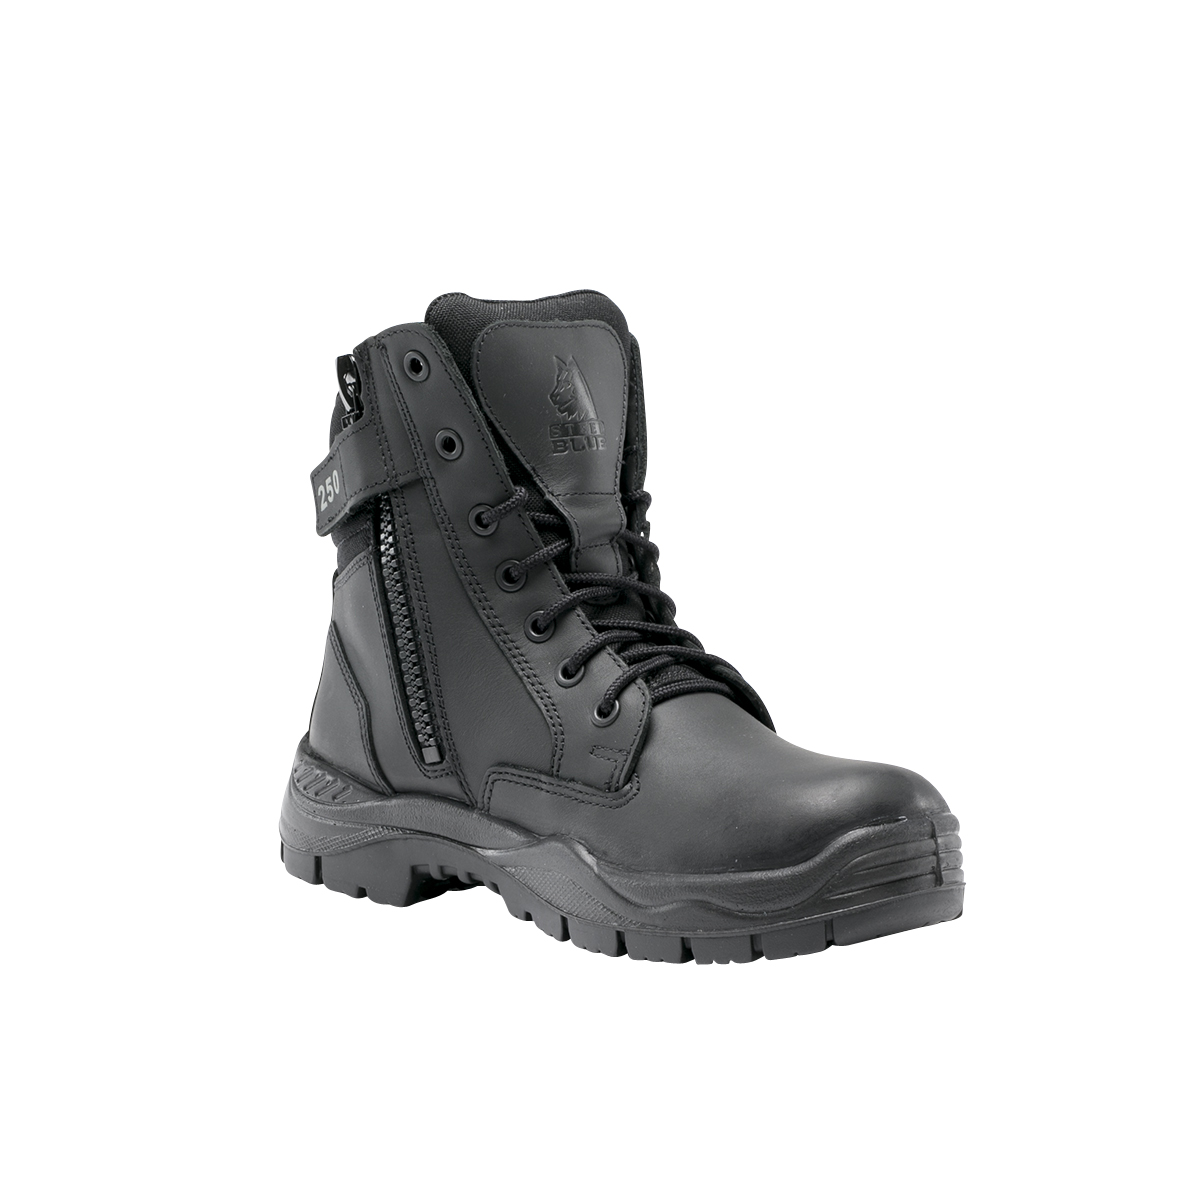 RESPONSE BOOT ENFORCER S10 -BLACK ANKLE HEIGHT LACE & ZIP